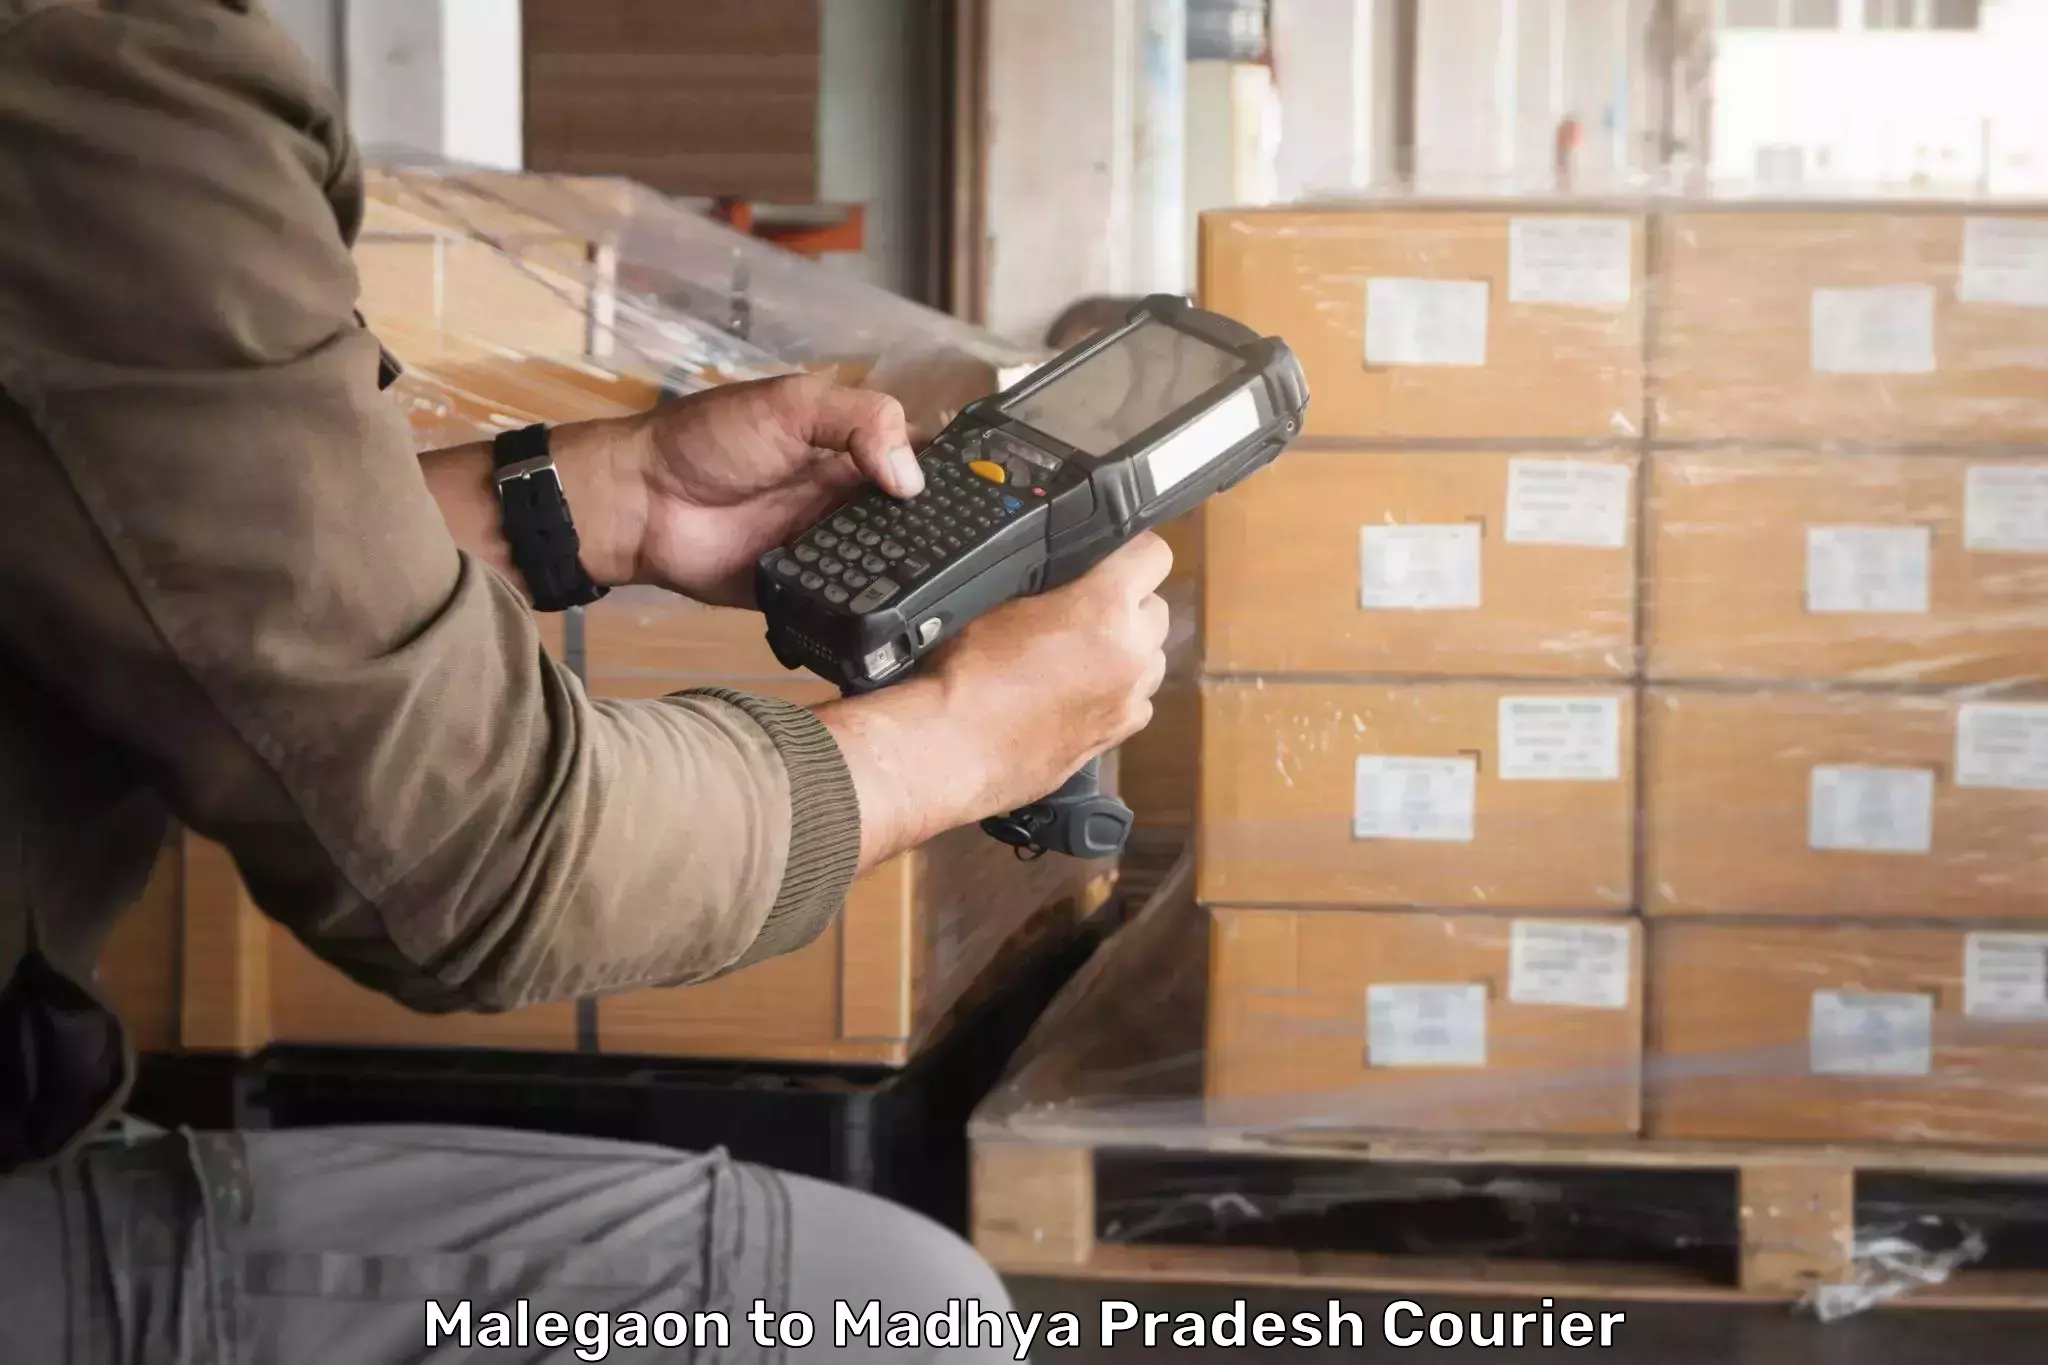 Speedy delivery service Malegaon to Ratlam